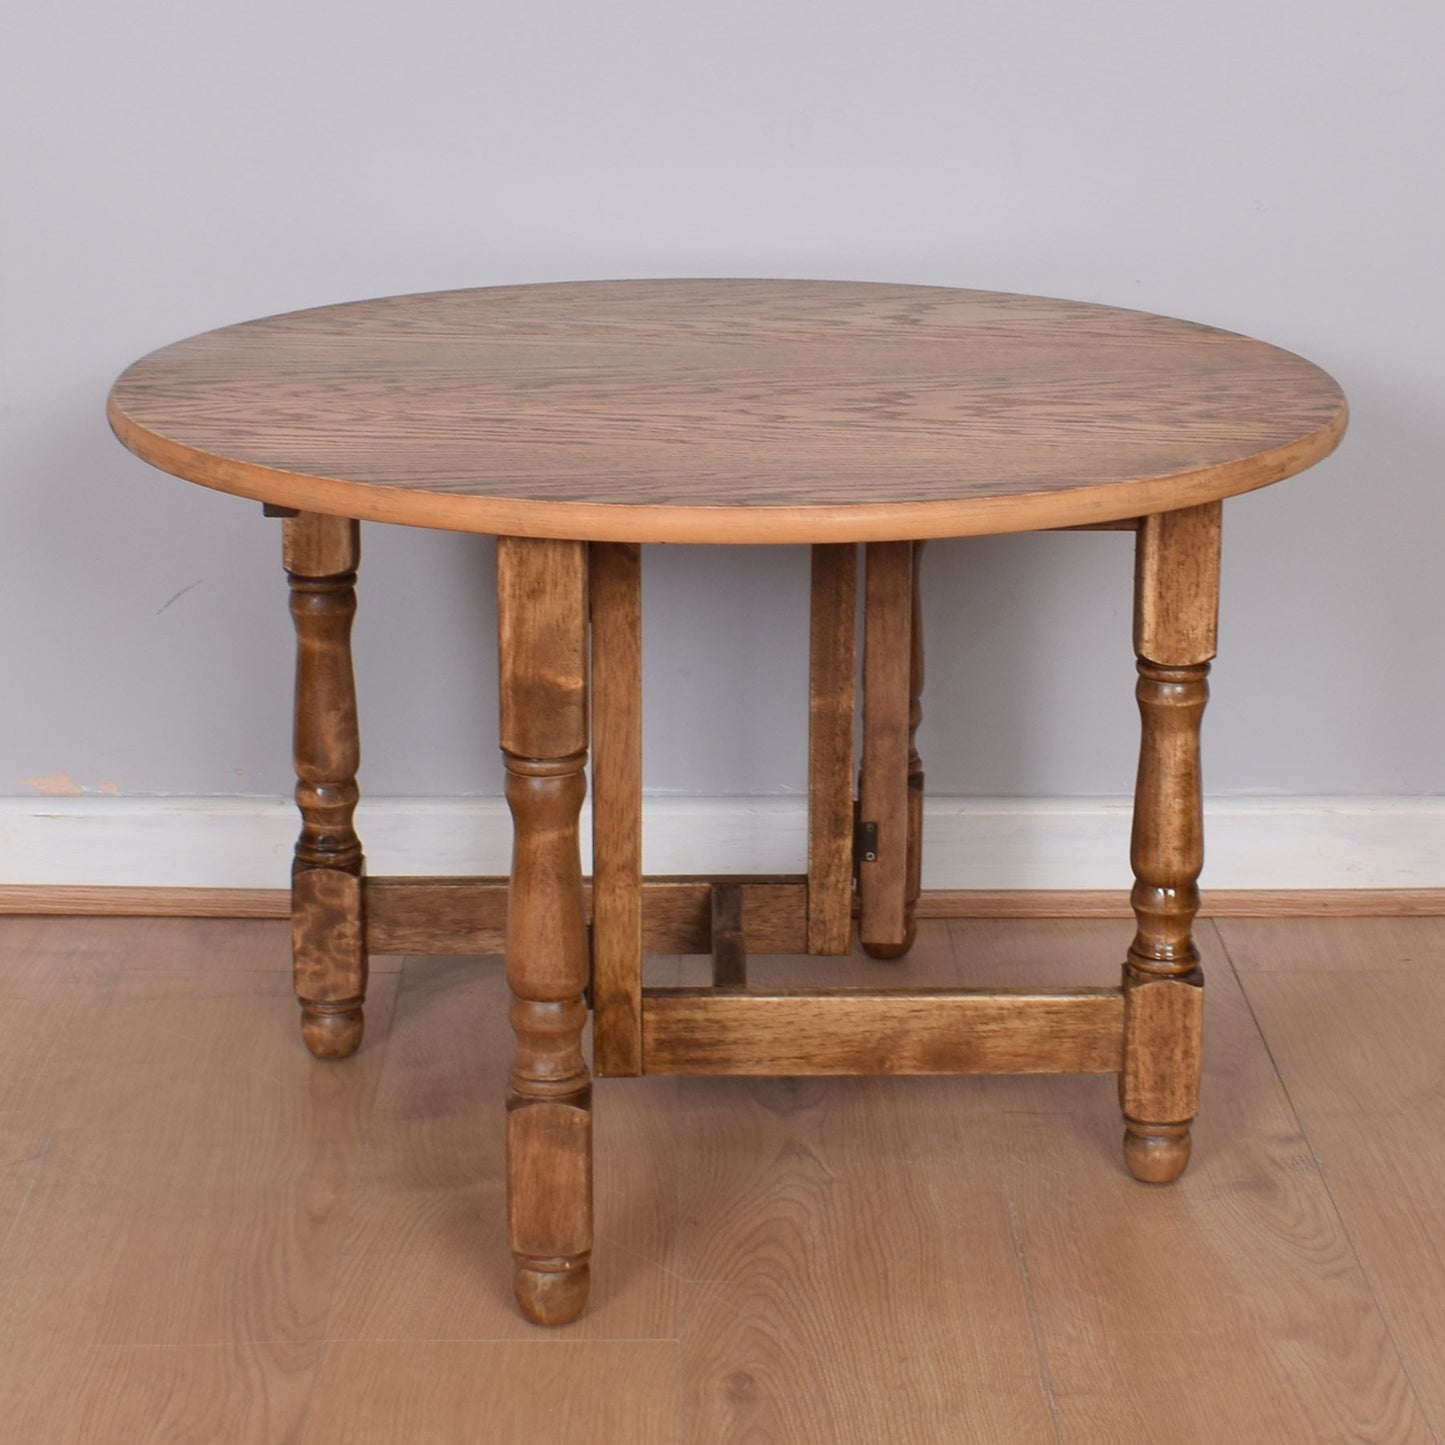 Small Drop-Leaf Occasional Table